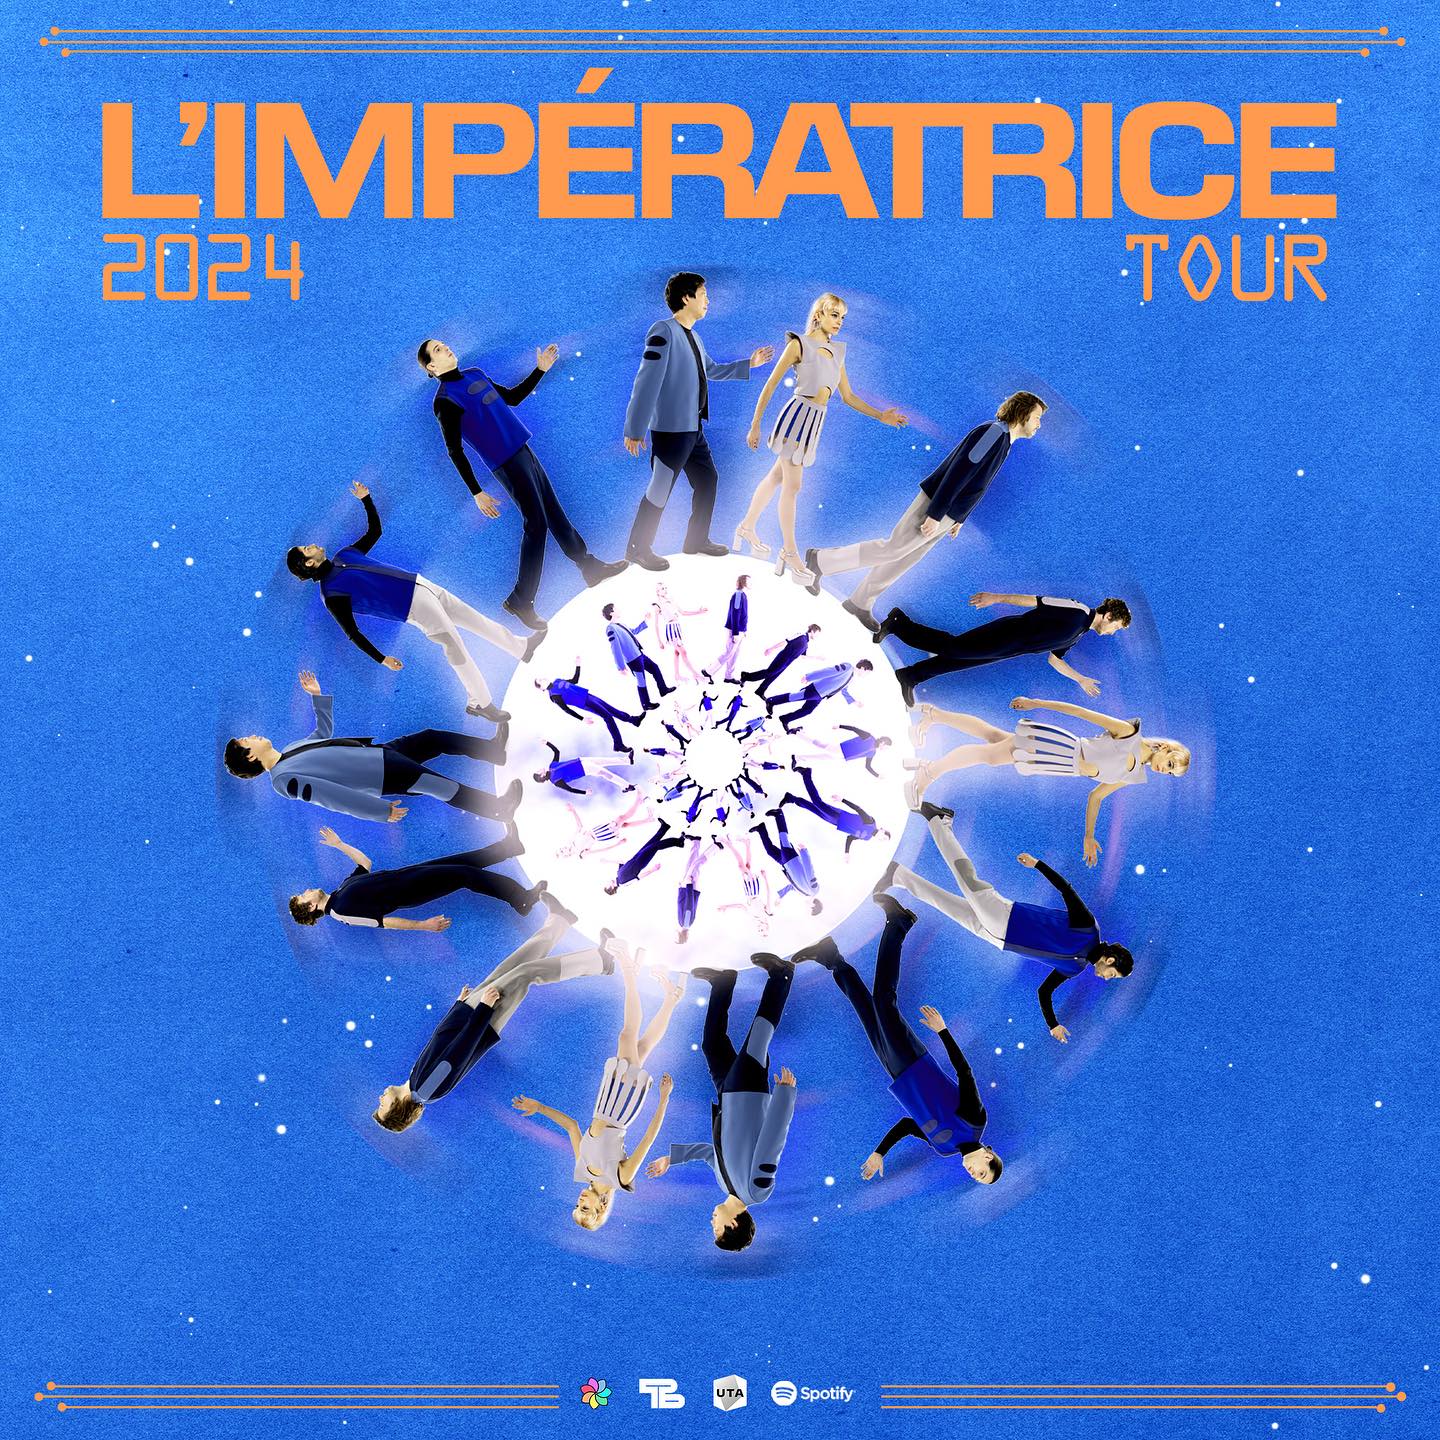 L'Impératrice at Olympia Tickets